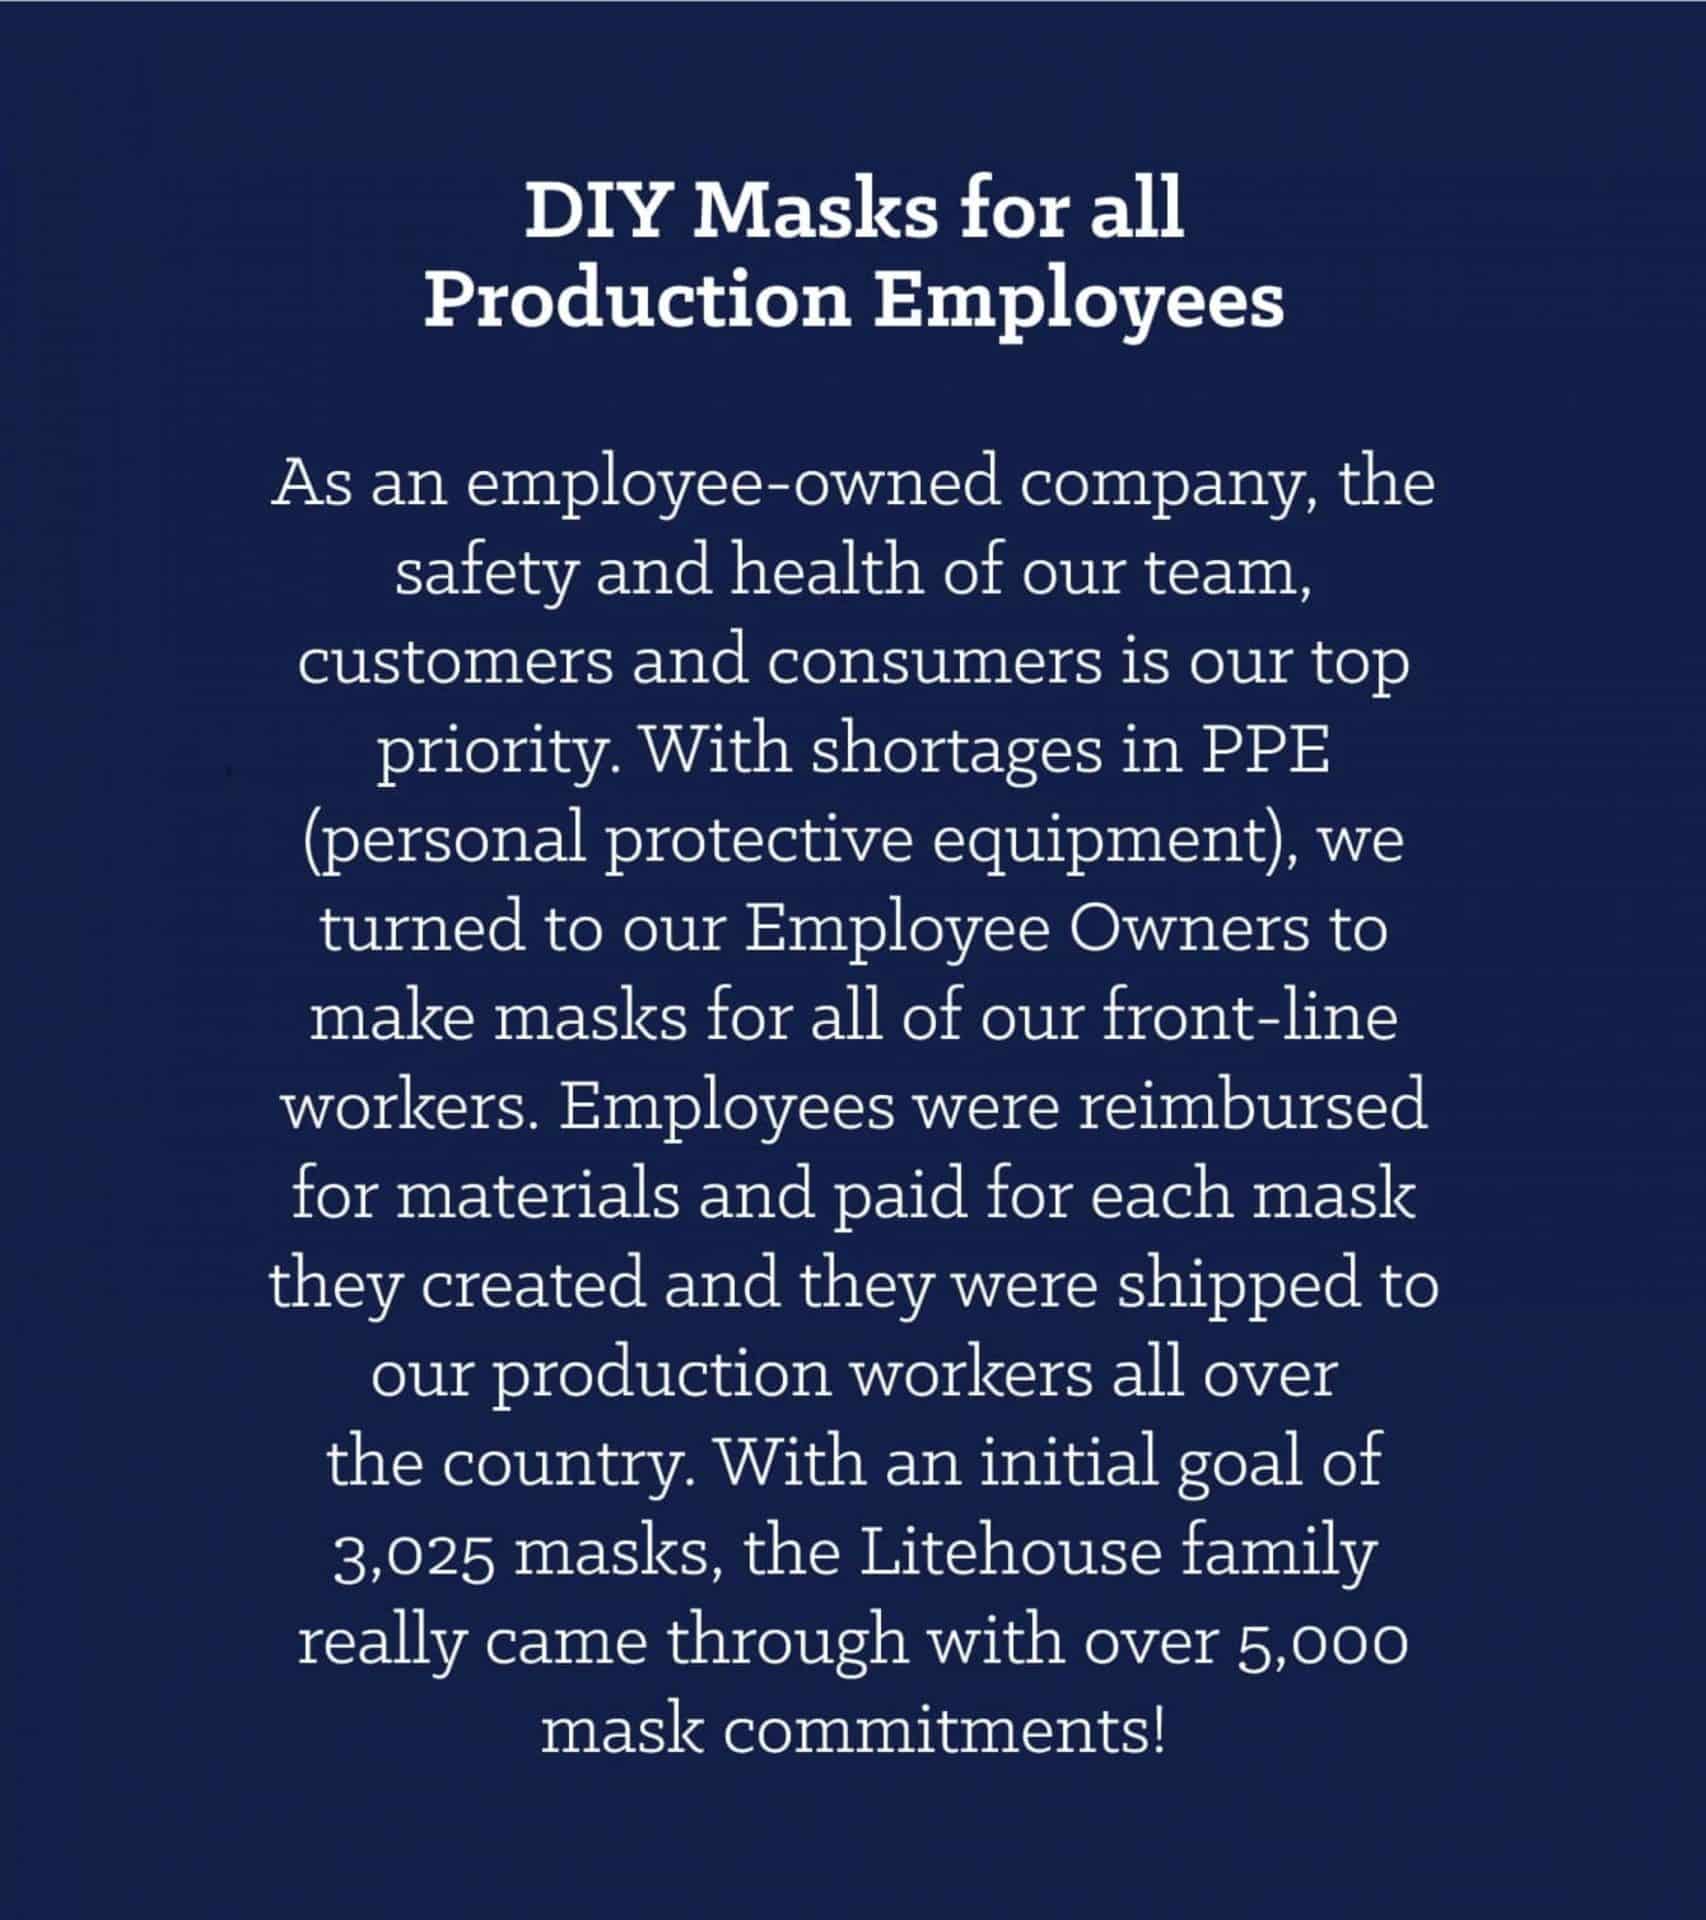 DIY Masks for all Production Employees